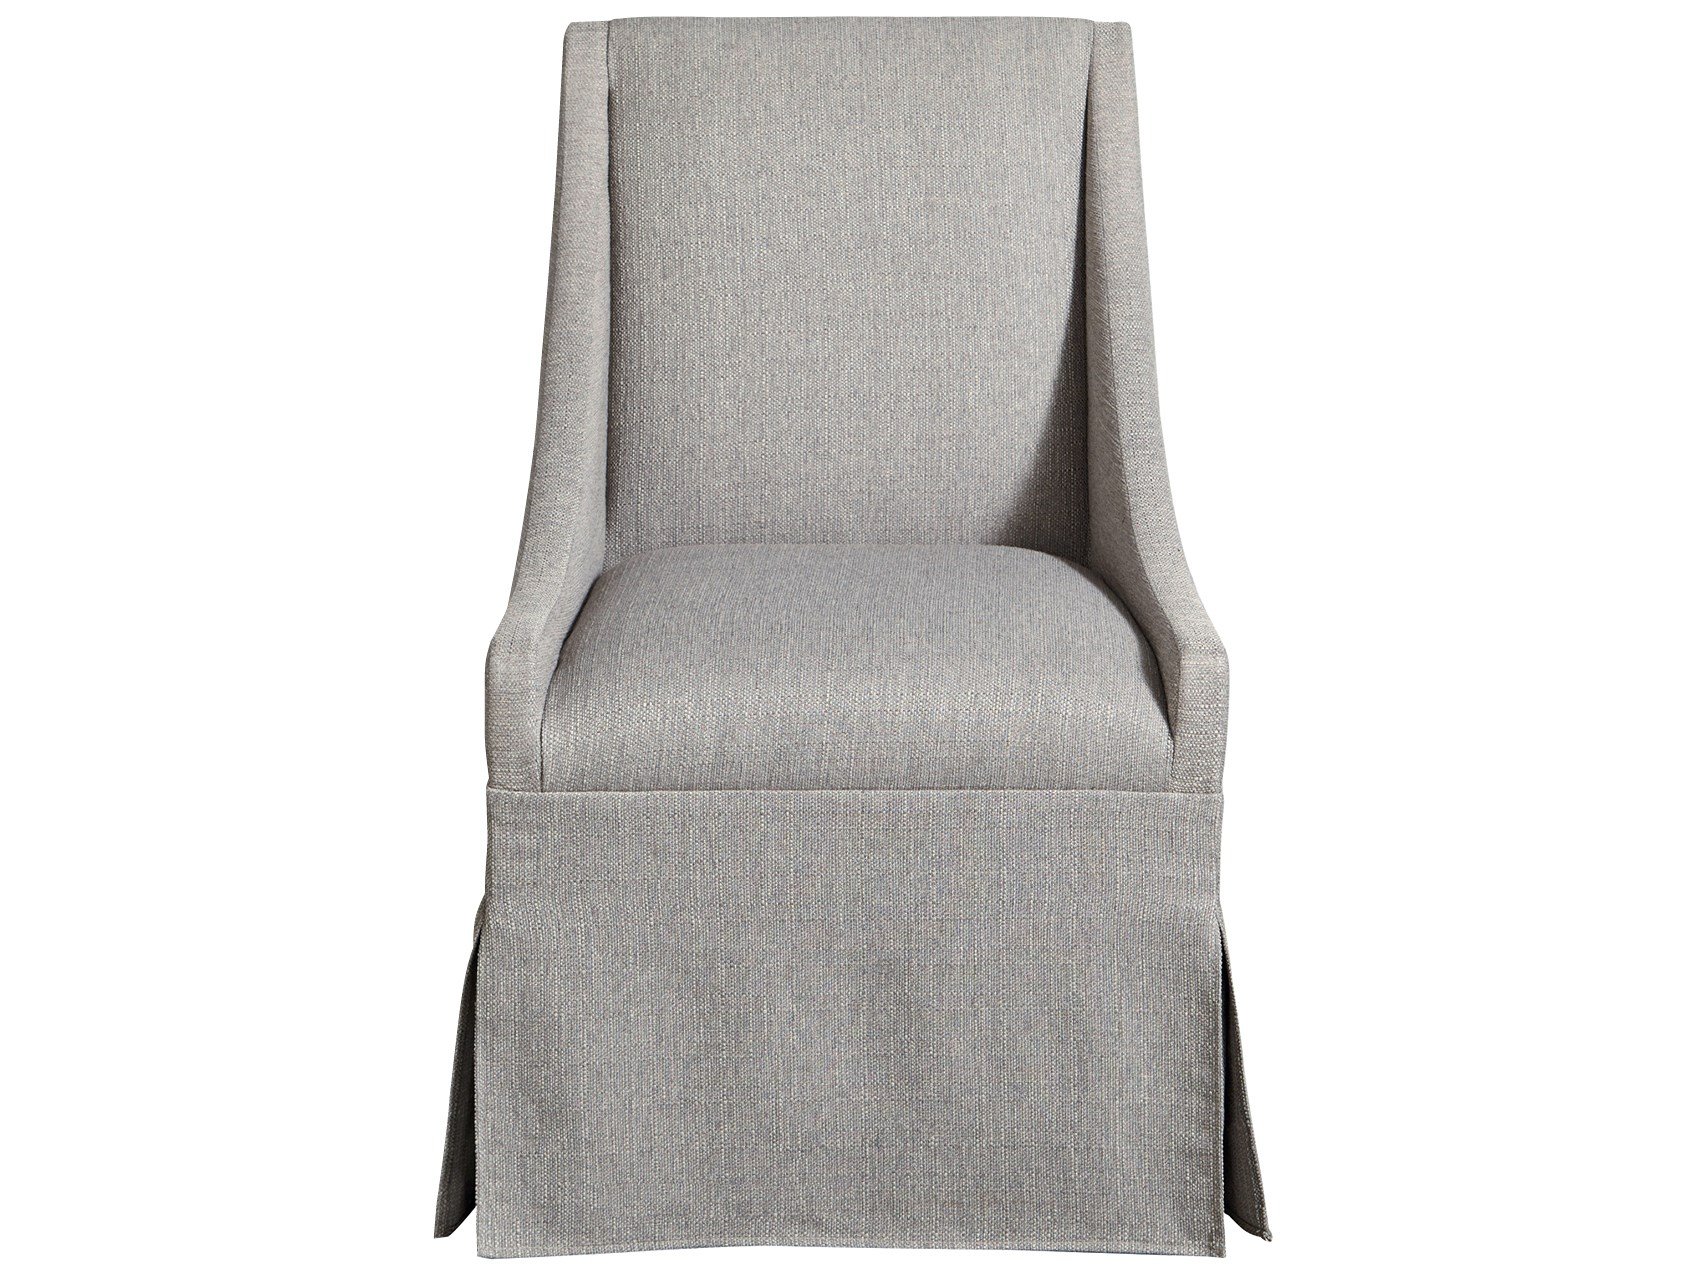 Townsend Castered Dining Chair